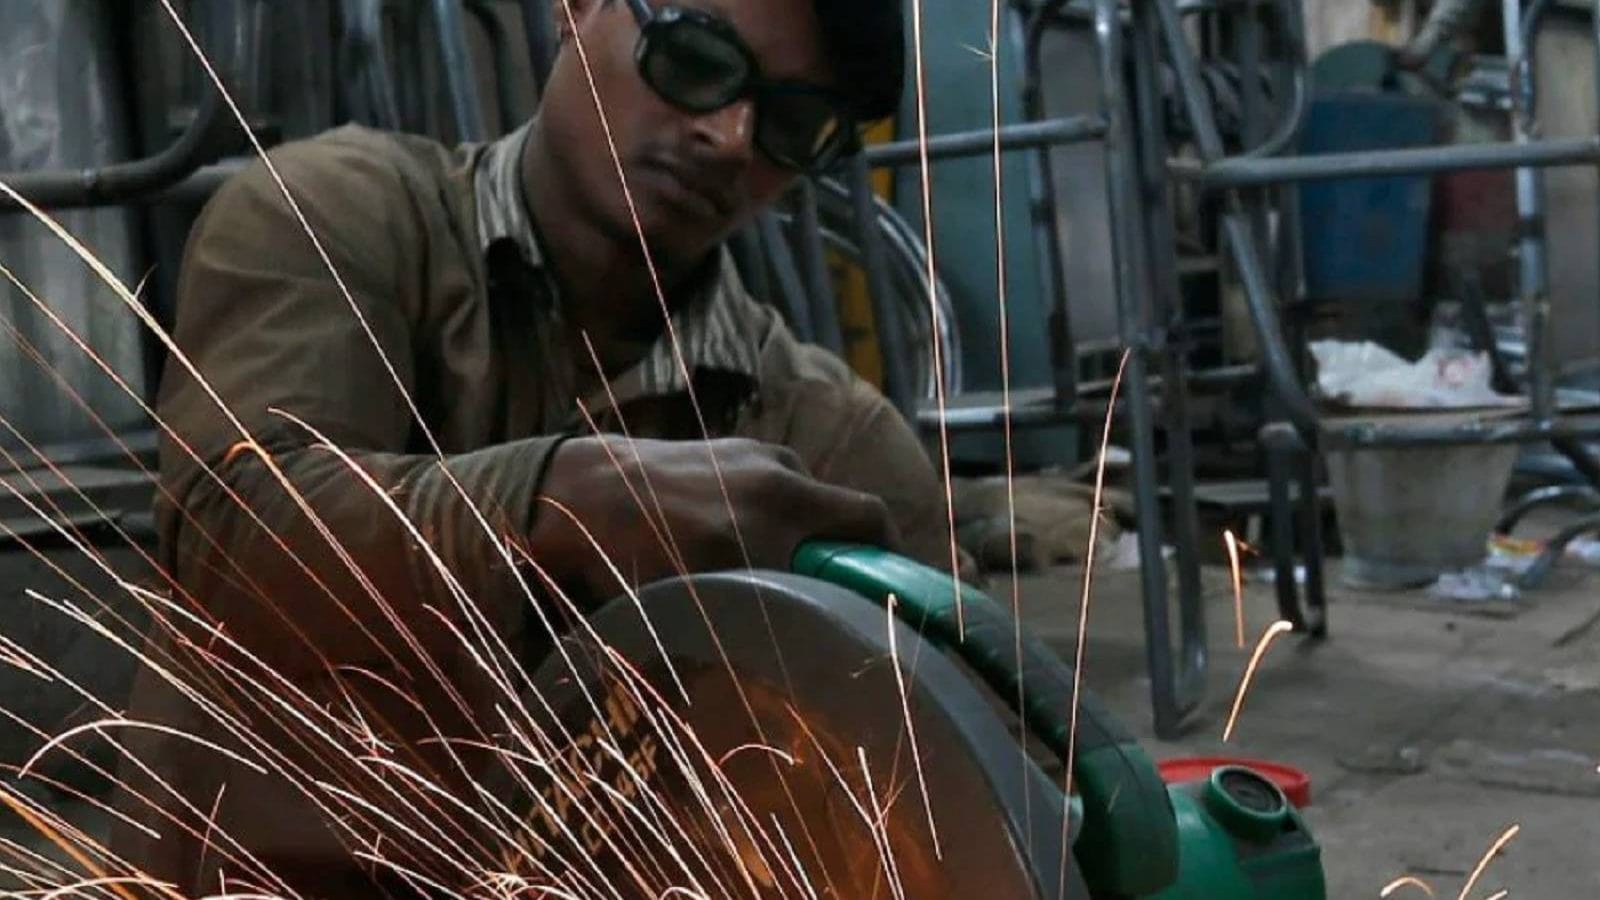 India's industrial output grew 3.1% in September, fell 0.8% in August ...